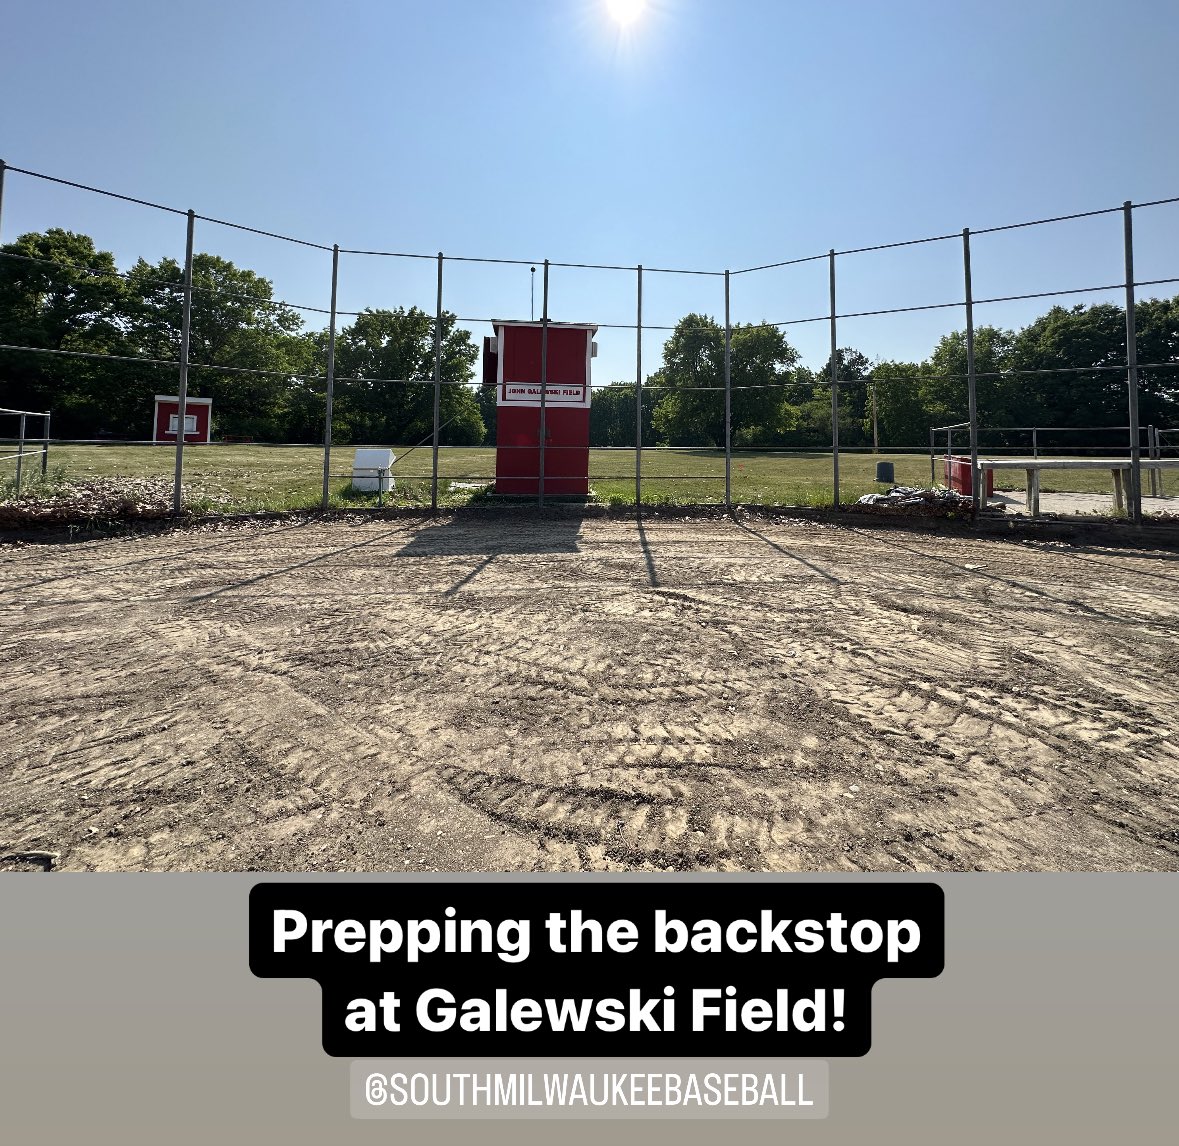 Work at Spaltholz Field has been really amazing, but the guys from H & H Construction are knocking it out of the park with their hard work at Galewski Field as well! 🚀⚾️🚜

#GoRockets #SMWay #LaunchingALegacy @SMRocketBasebal